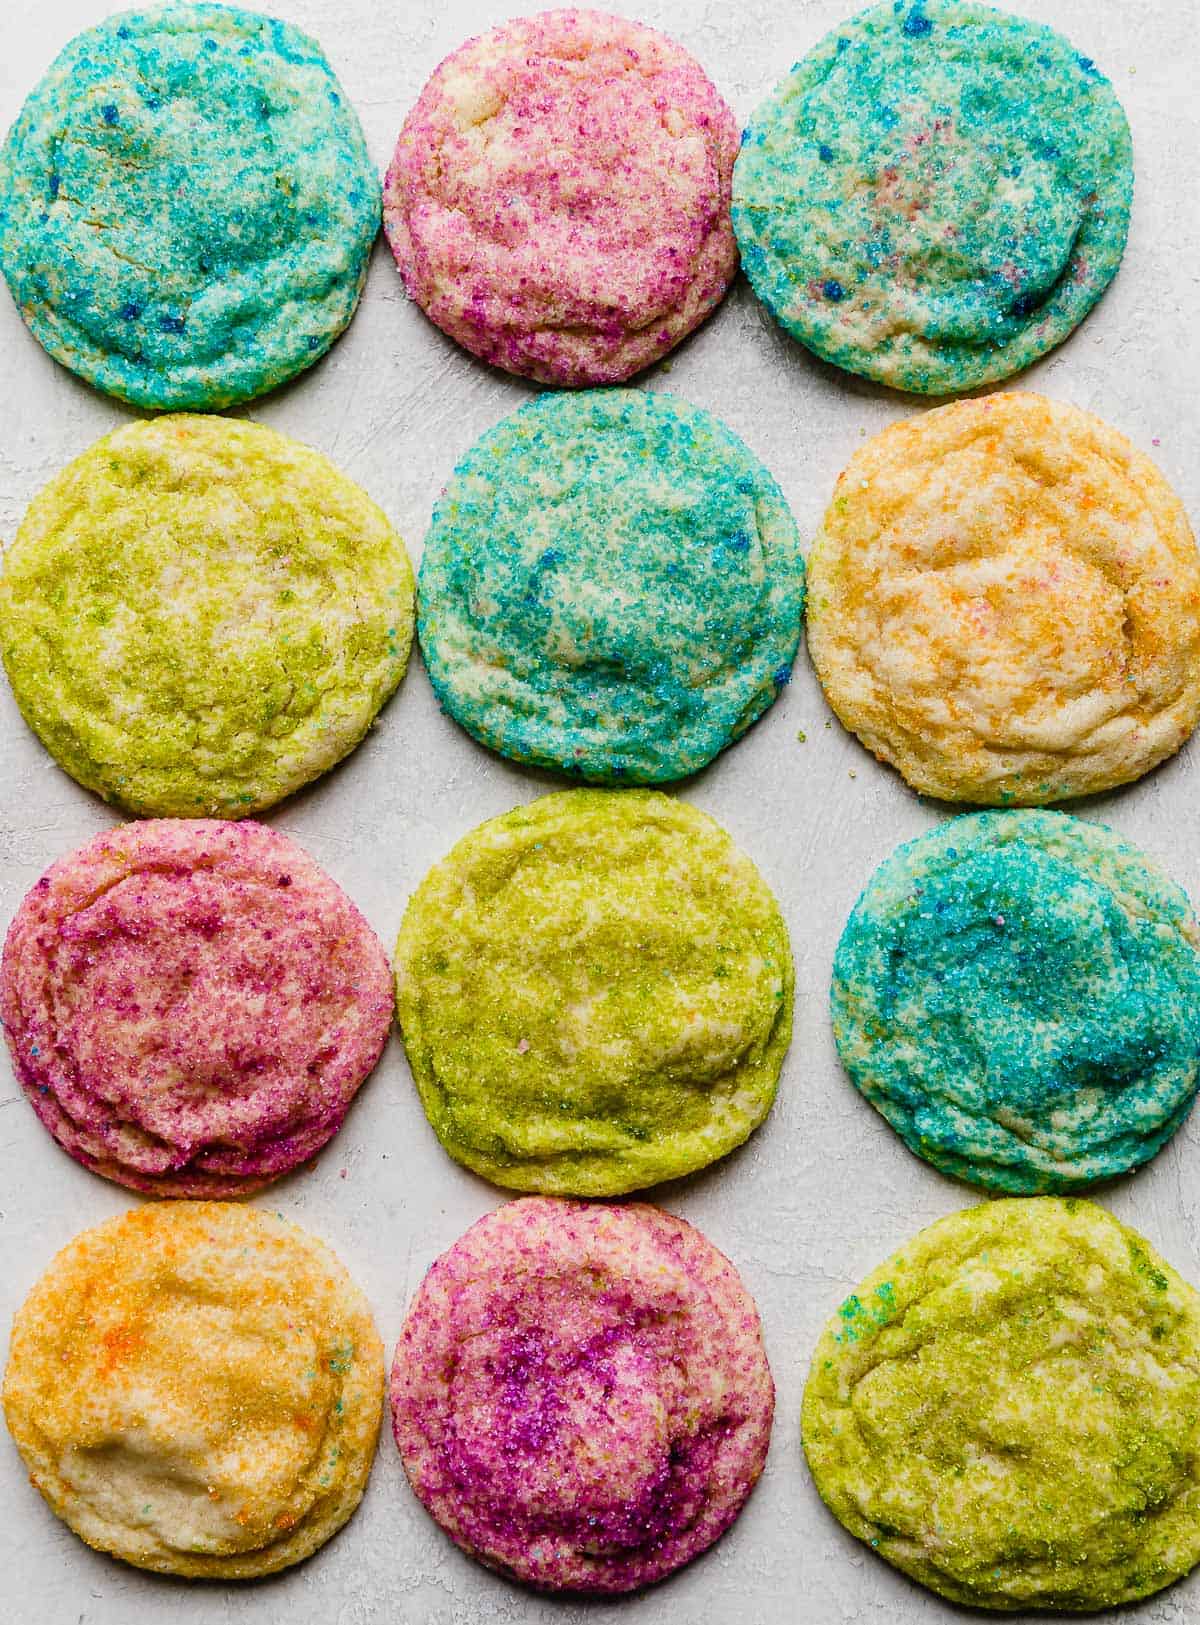 Sugar cookies covered in colorful sugar on a white background.